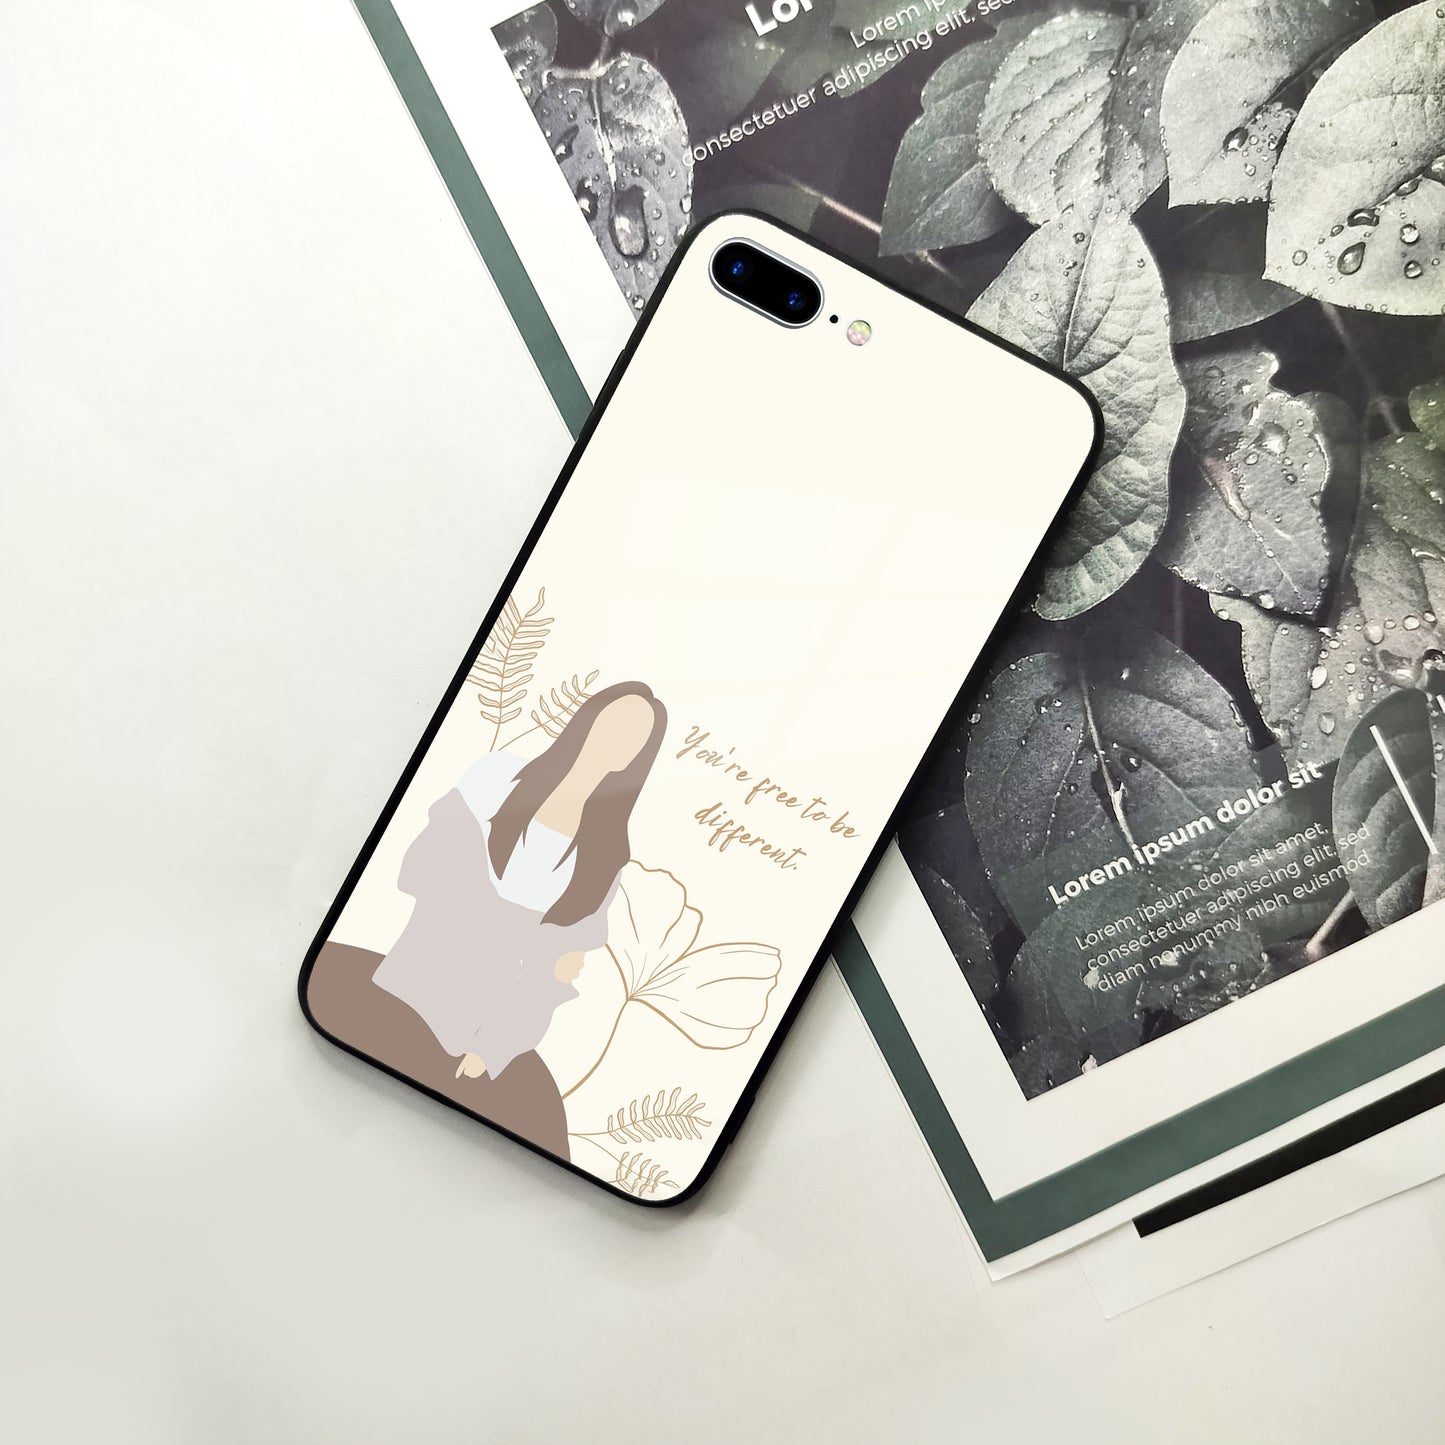 Always Stay Humble And Kind Glass Phone Cover-V2 for iPhone